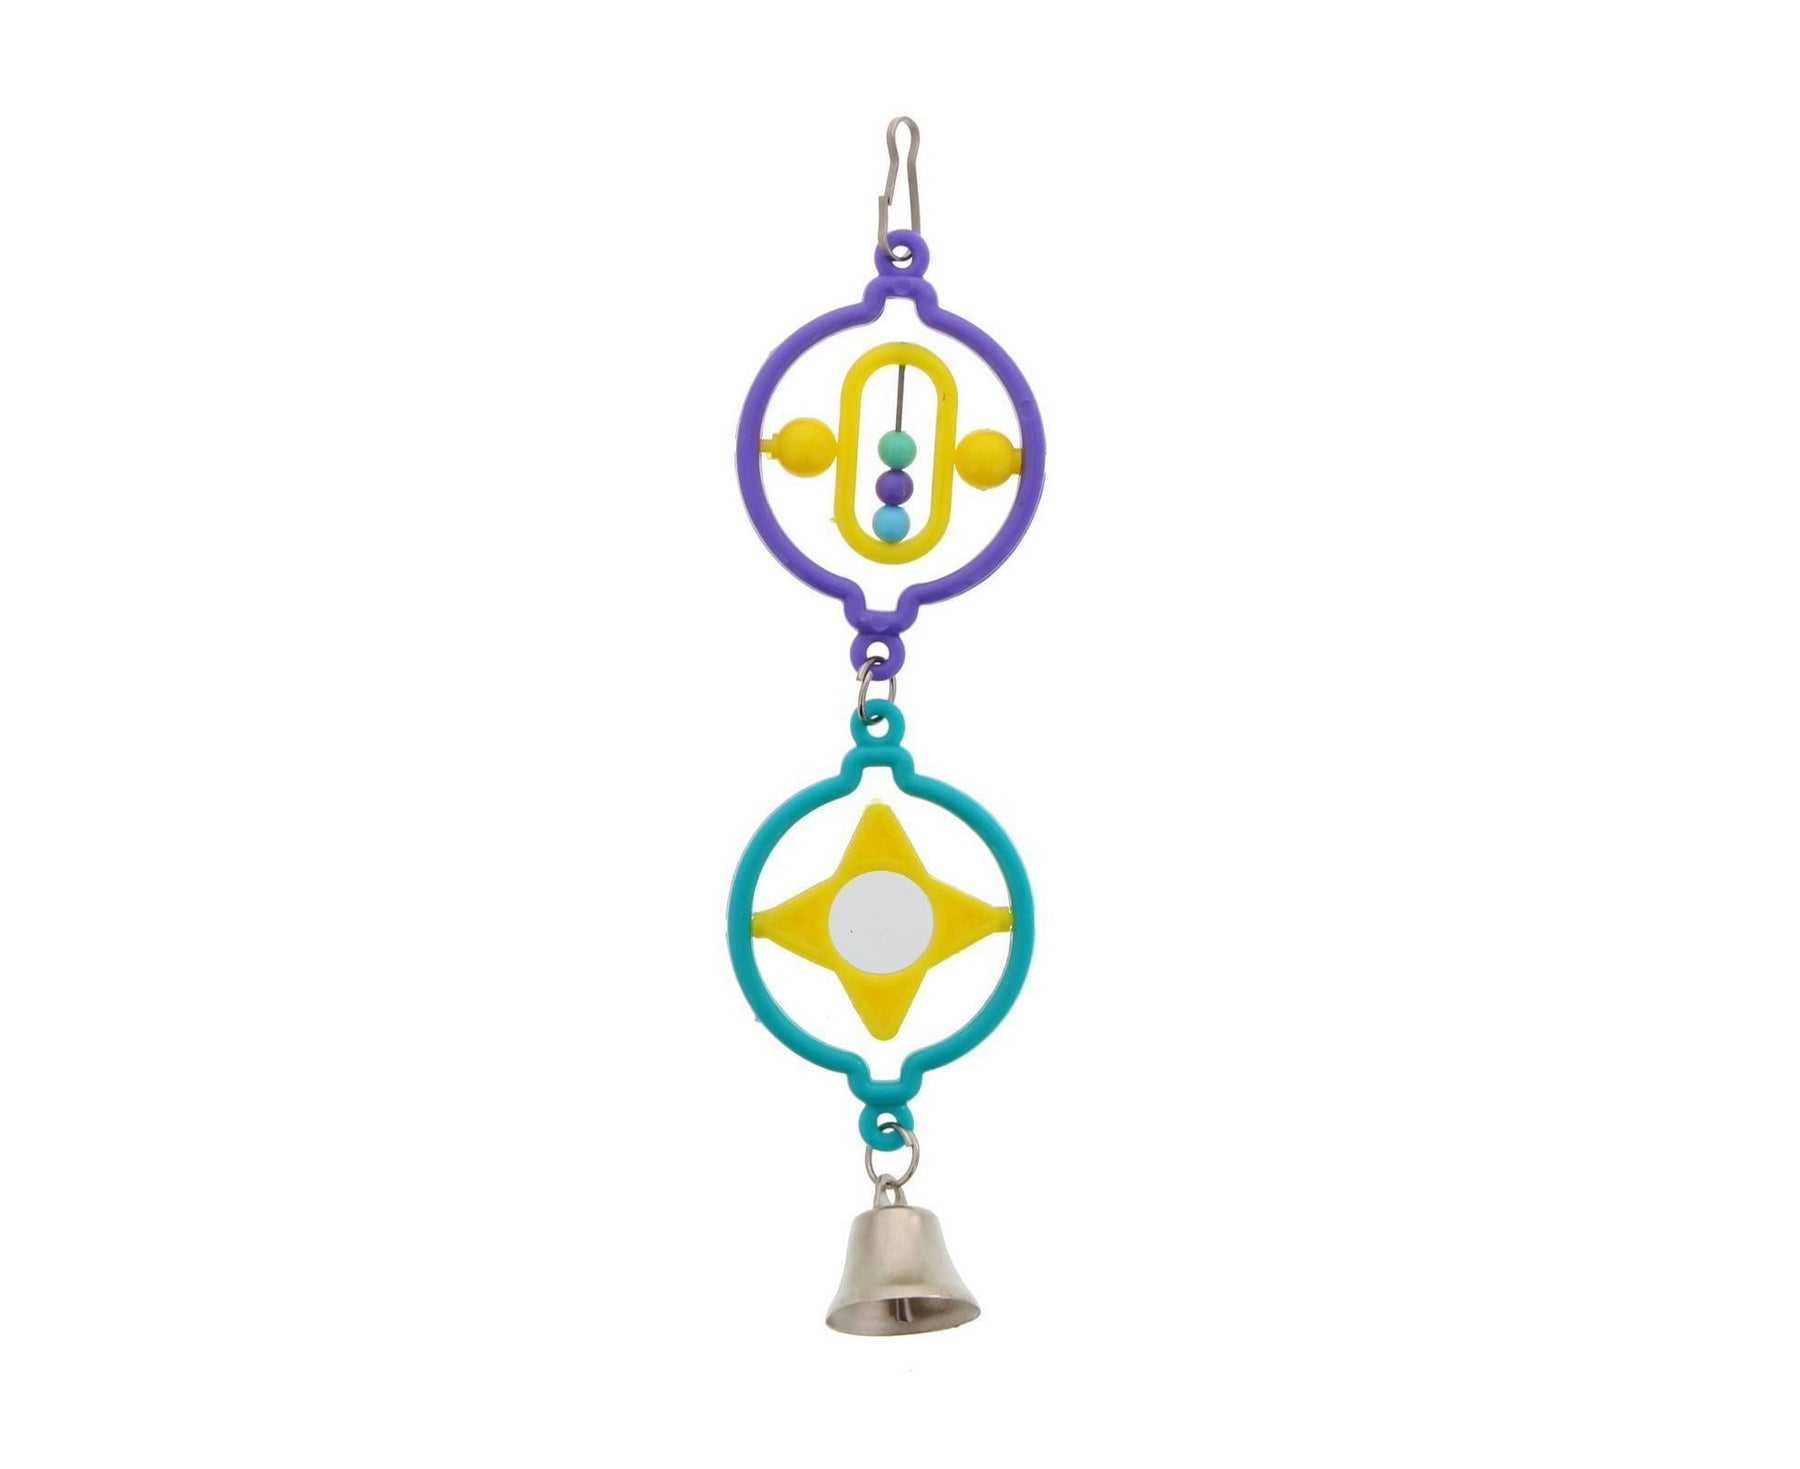 Avi One Bird Toy - Twin Rings With Turning Beads; Star; Mirror And Bell